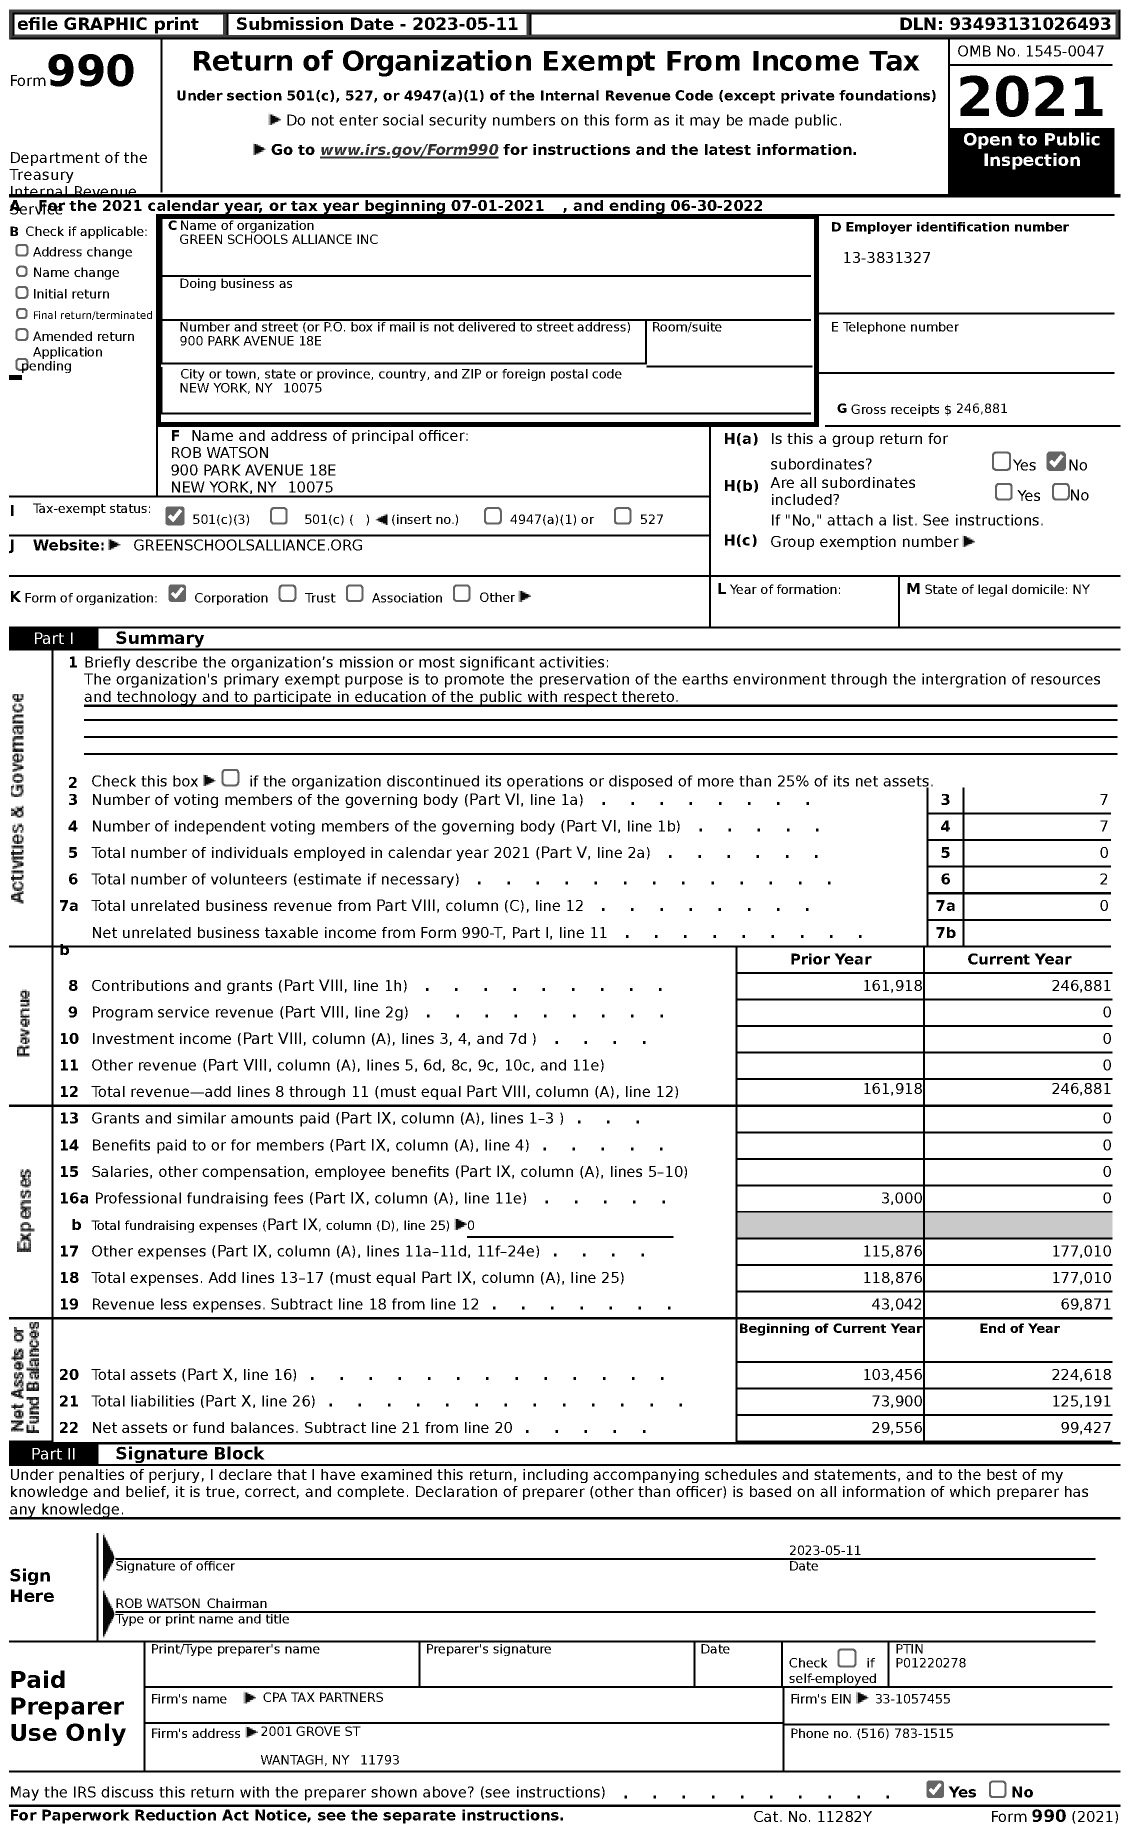 Image of first page of 2021 Form 990 for Green Schools Alliance (GSA)